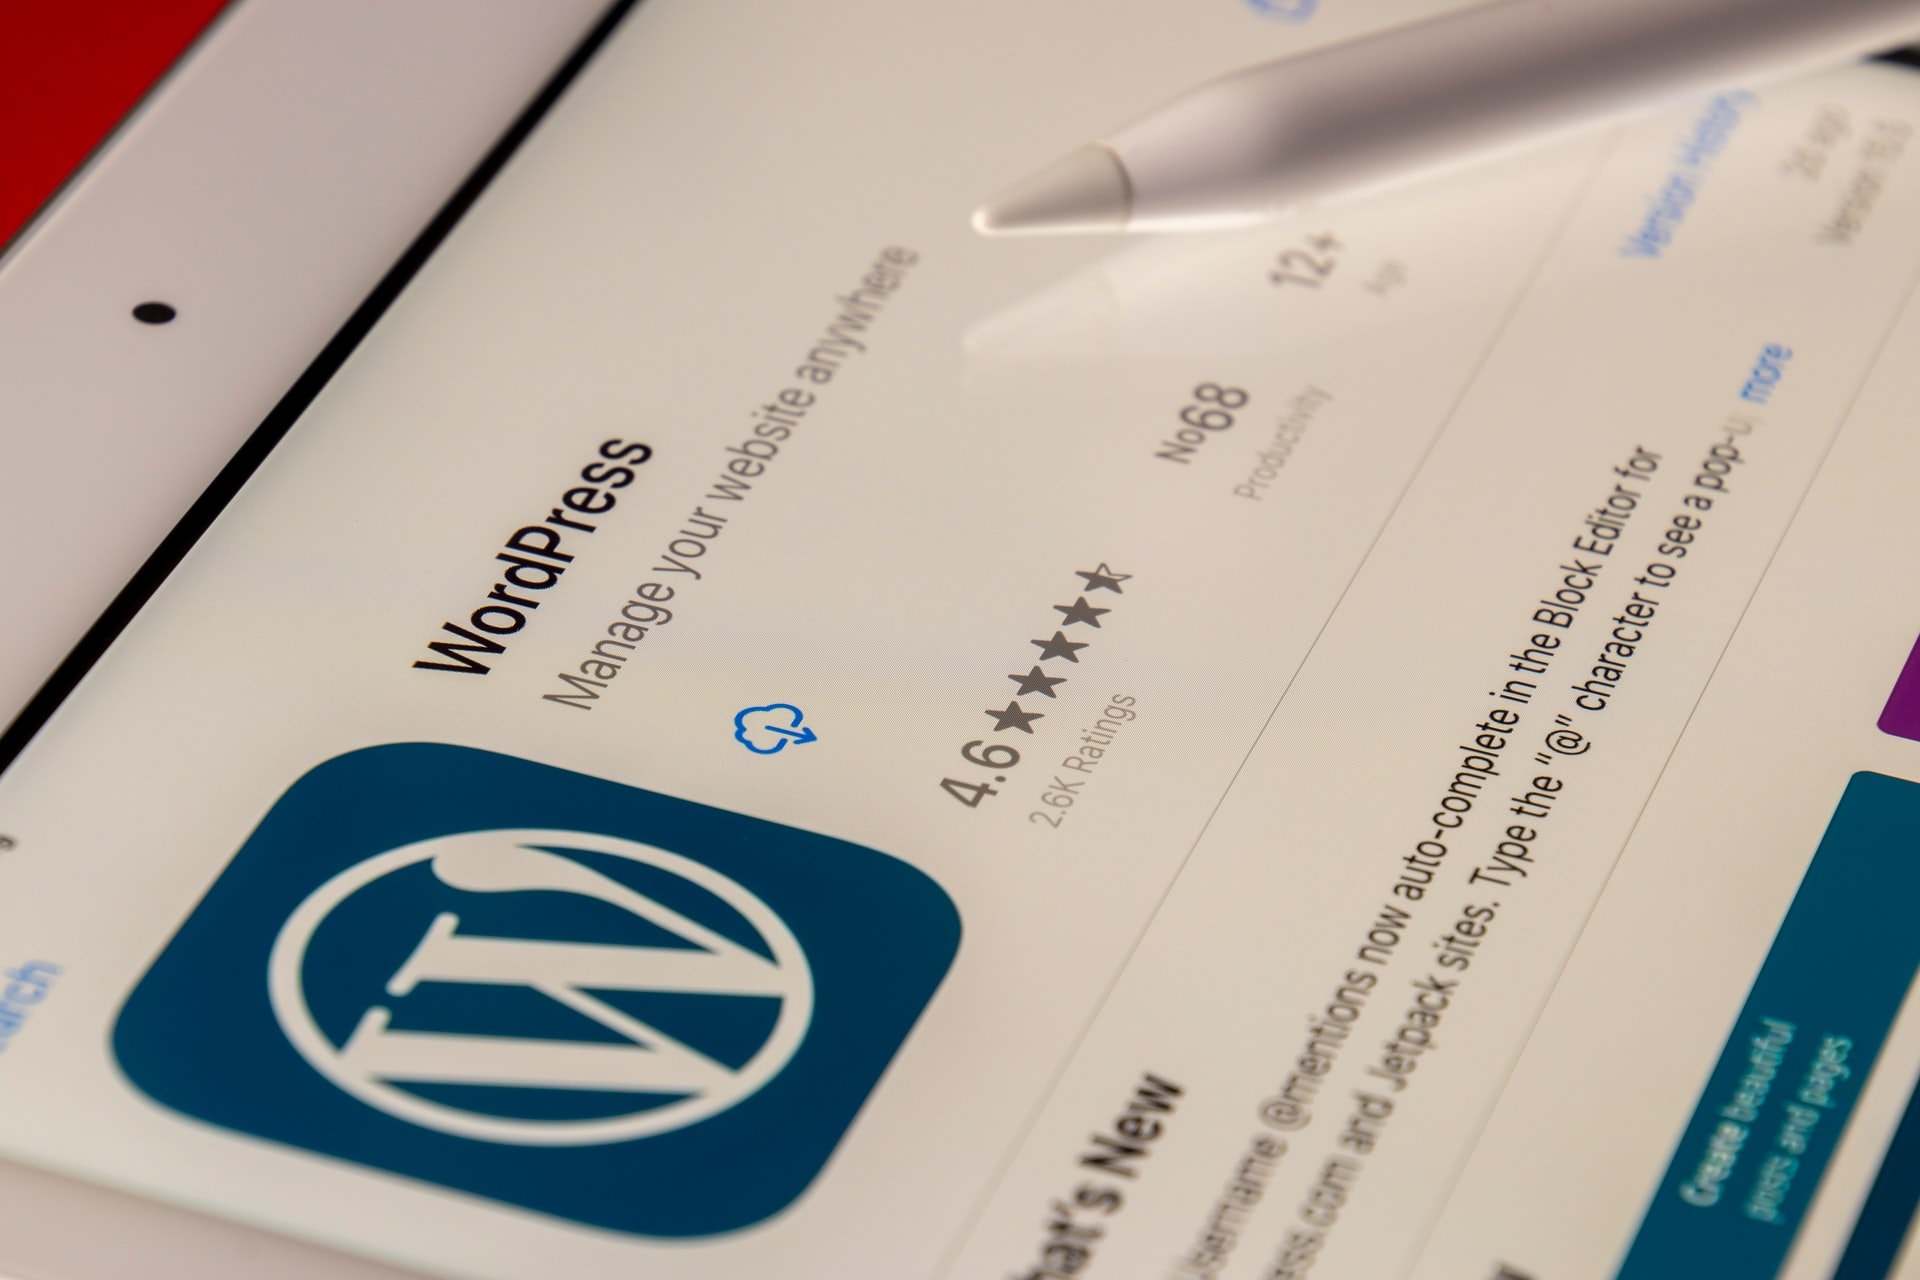 Blogging on WordPress. Some tips on how to optimize your website